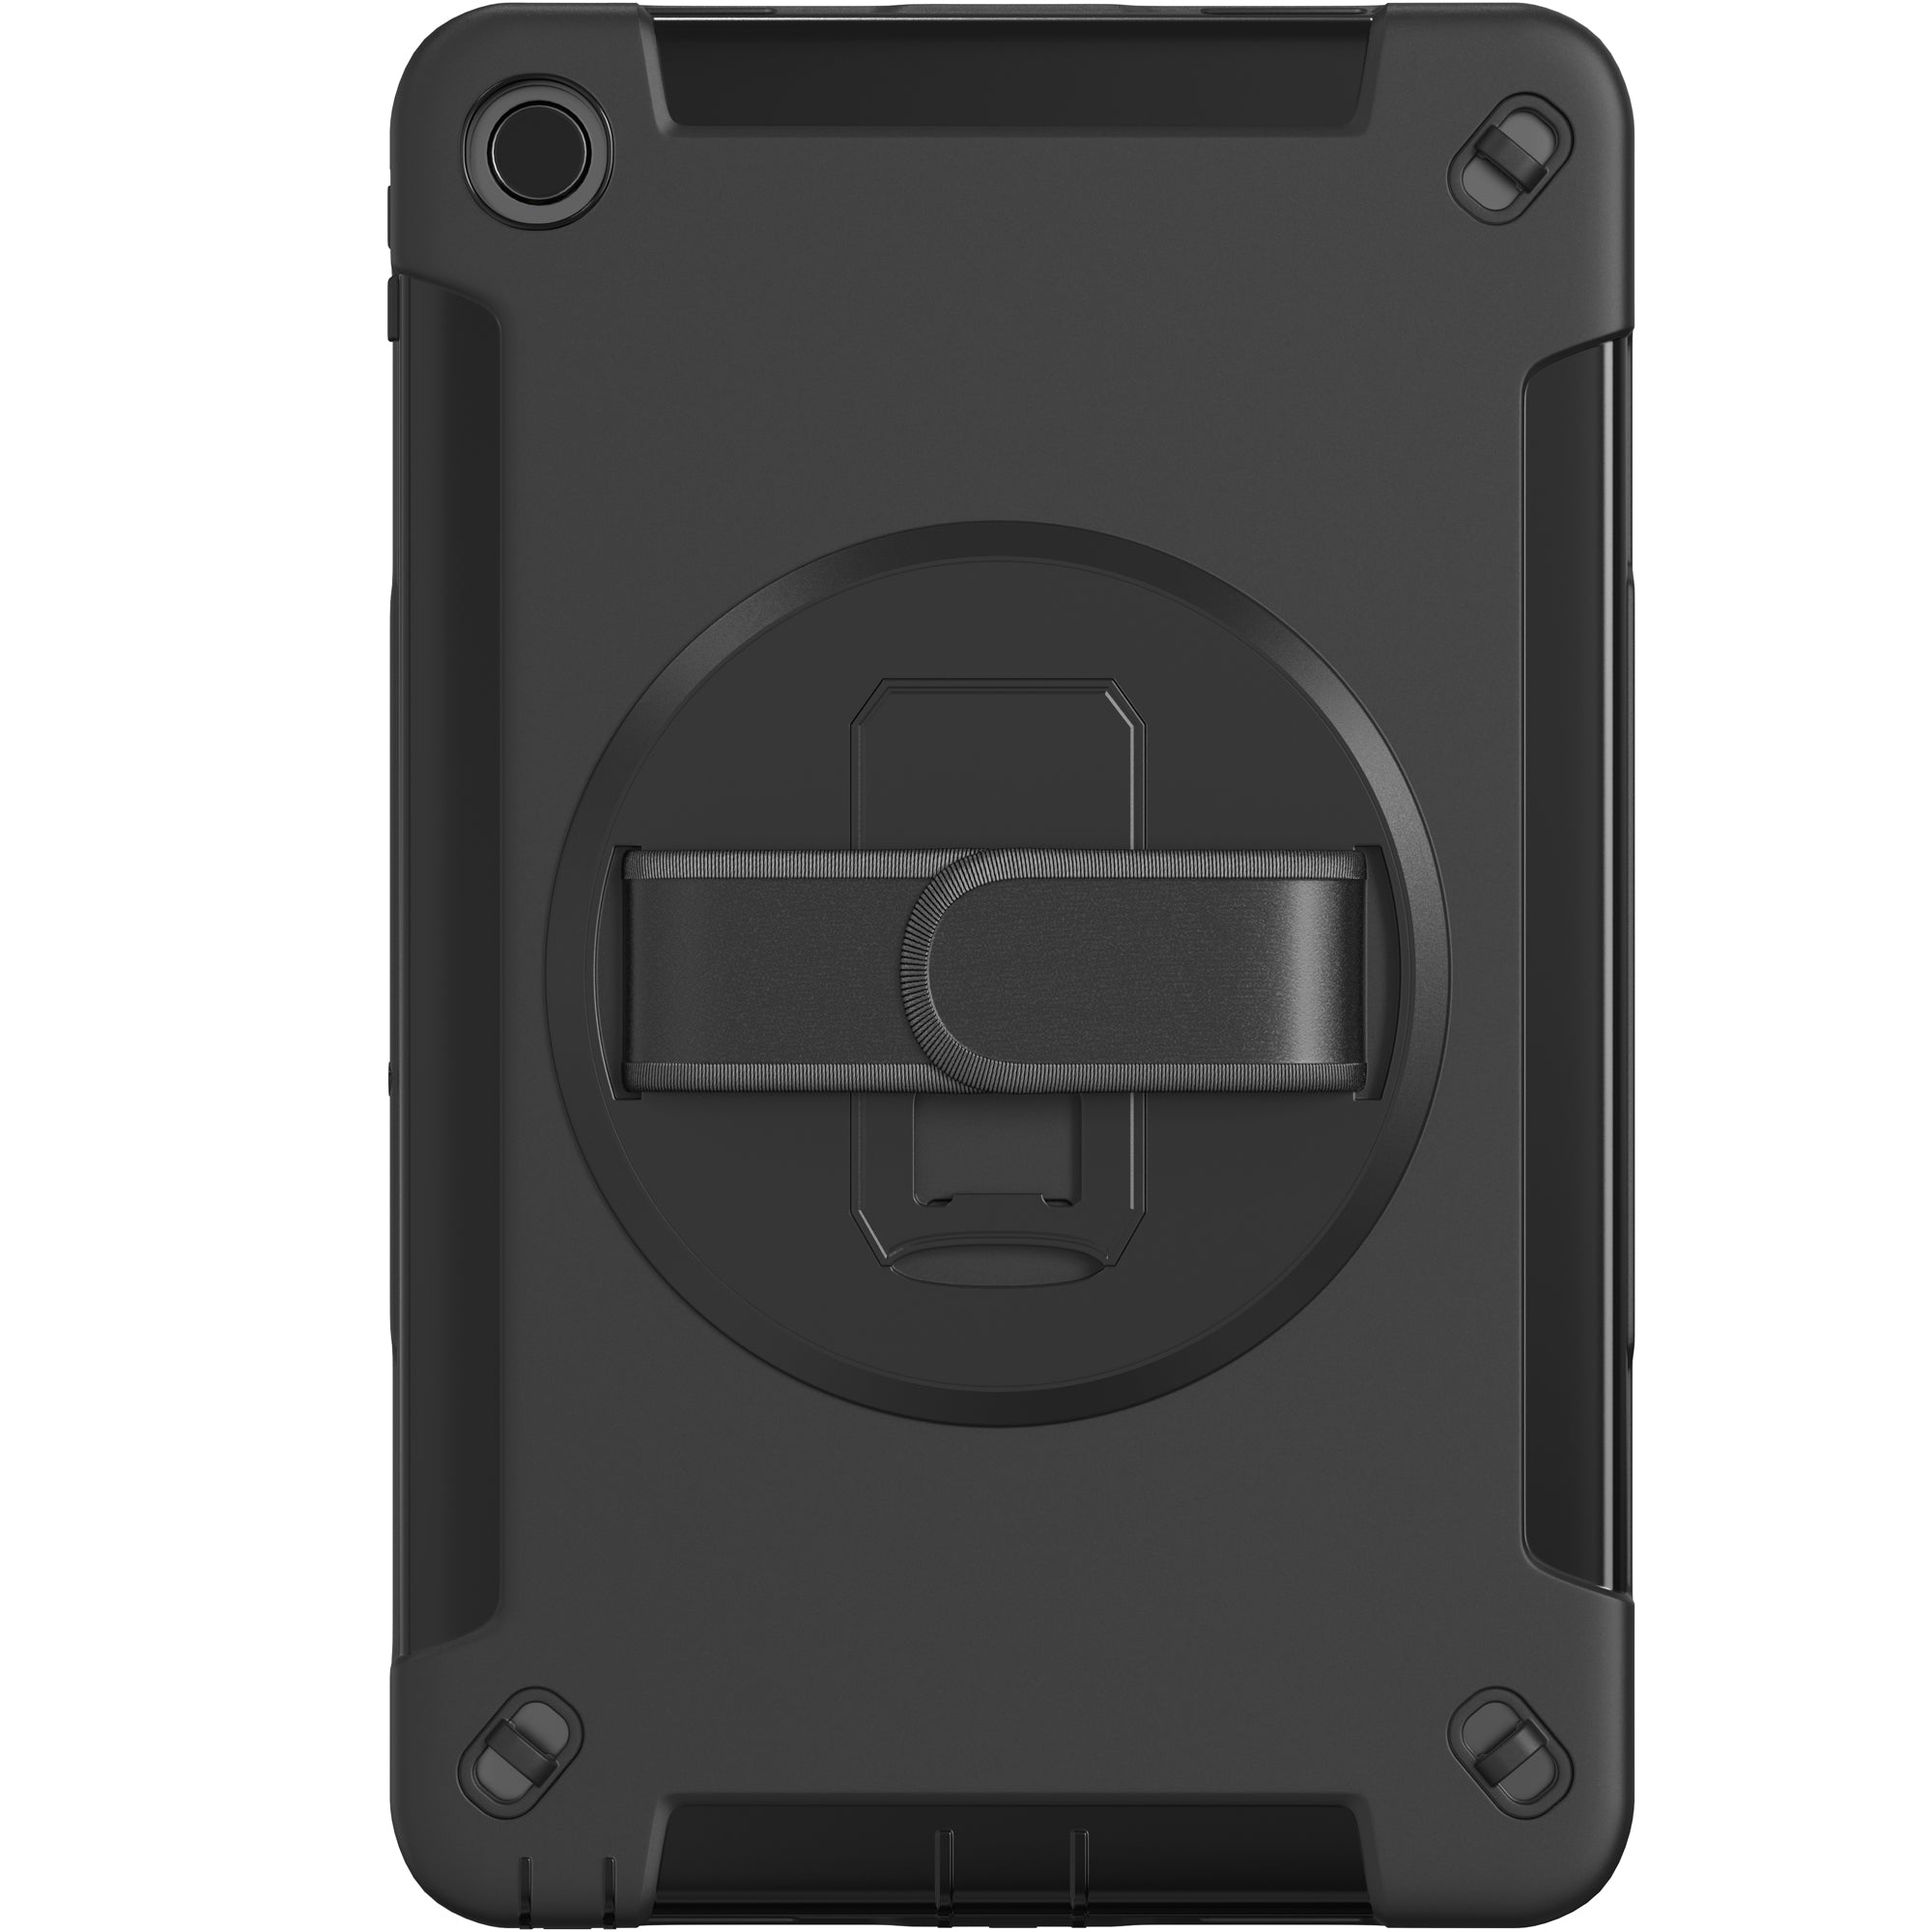 Protective Case with Built-in 360-Degree Rotatable Grip Kickstand for Lenovo M10 Plus Gen 3